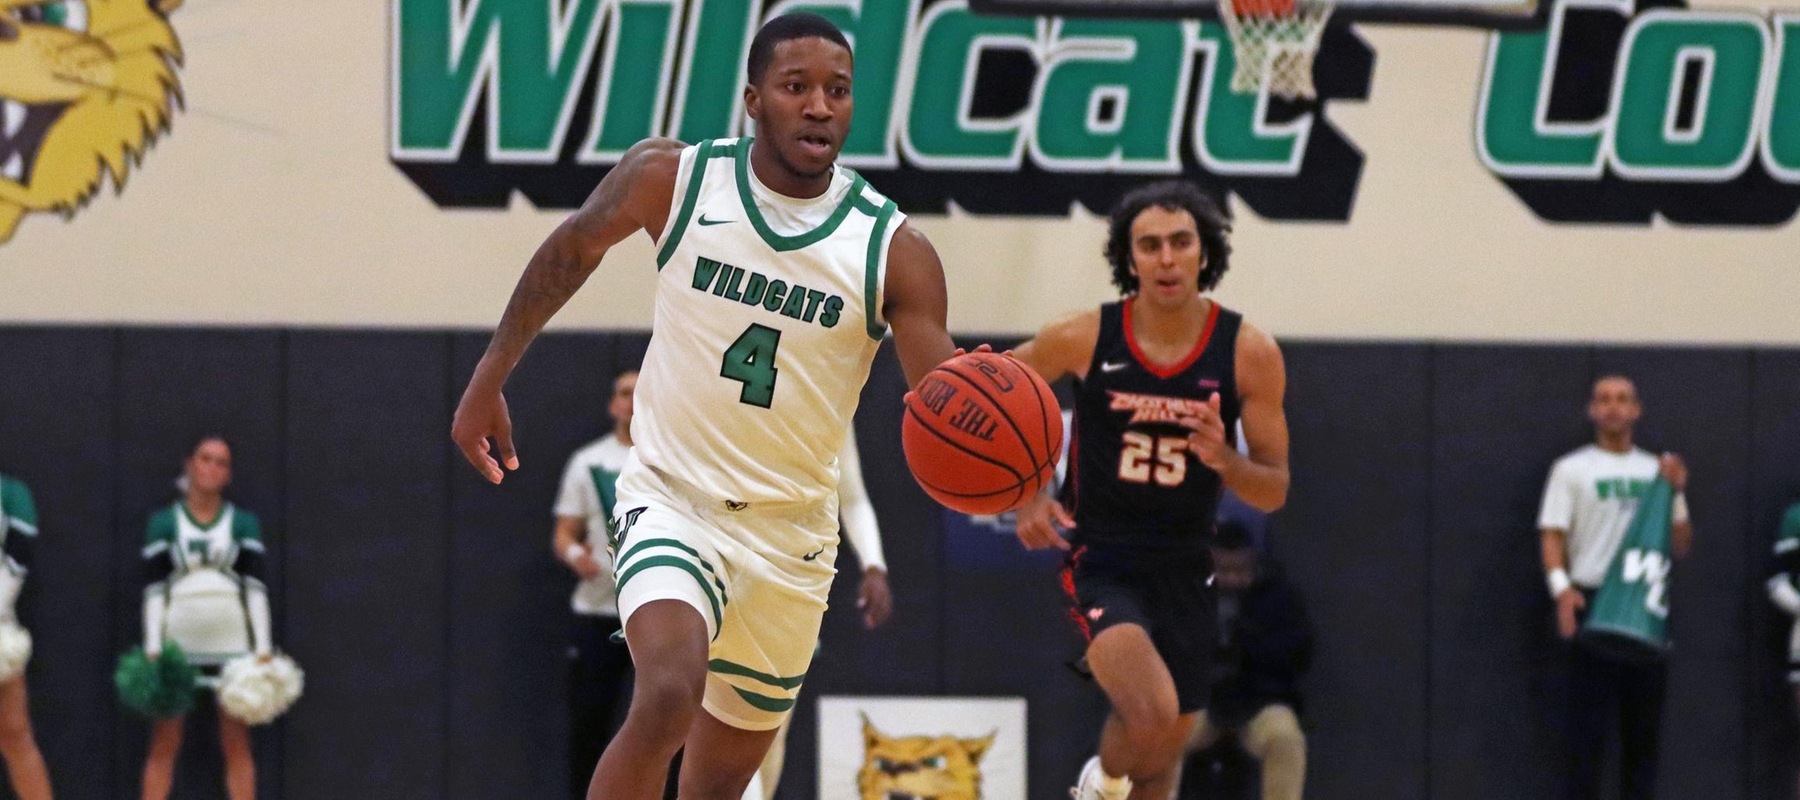 File photo of Taalib Holloman who scored a career-high 30 points at Holy Family on Wednesday. Copyright 2023; Wilmington University. All rights reserved. Photo by Dan Lauletta. November 29, 2023 vs. Chestnut Hill.